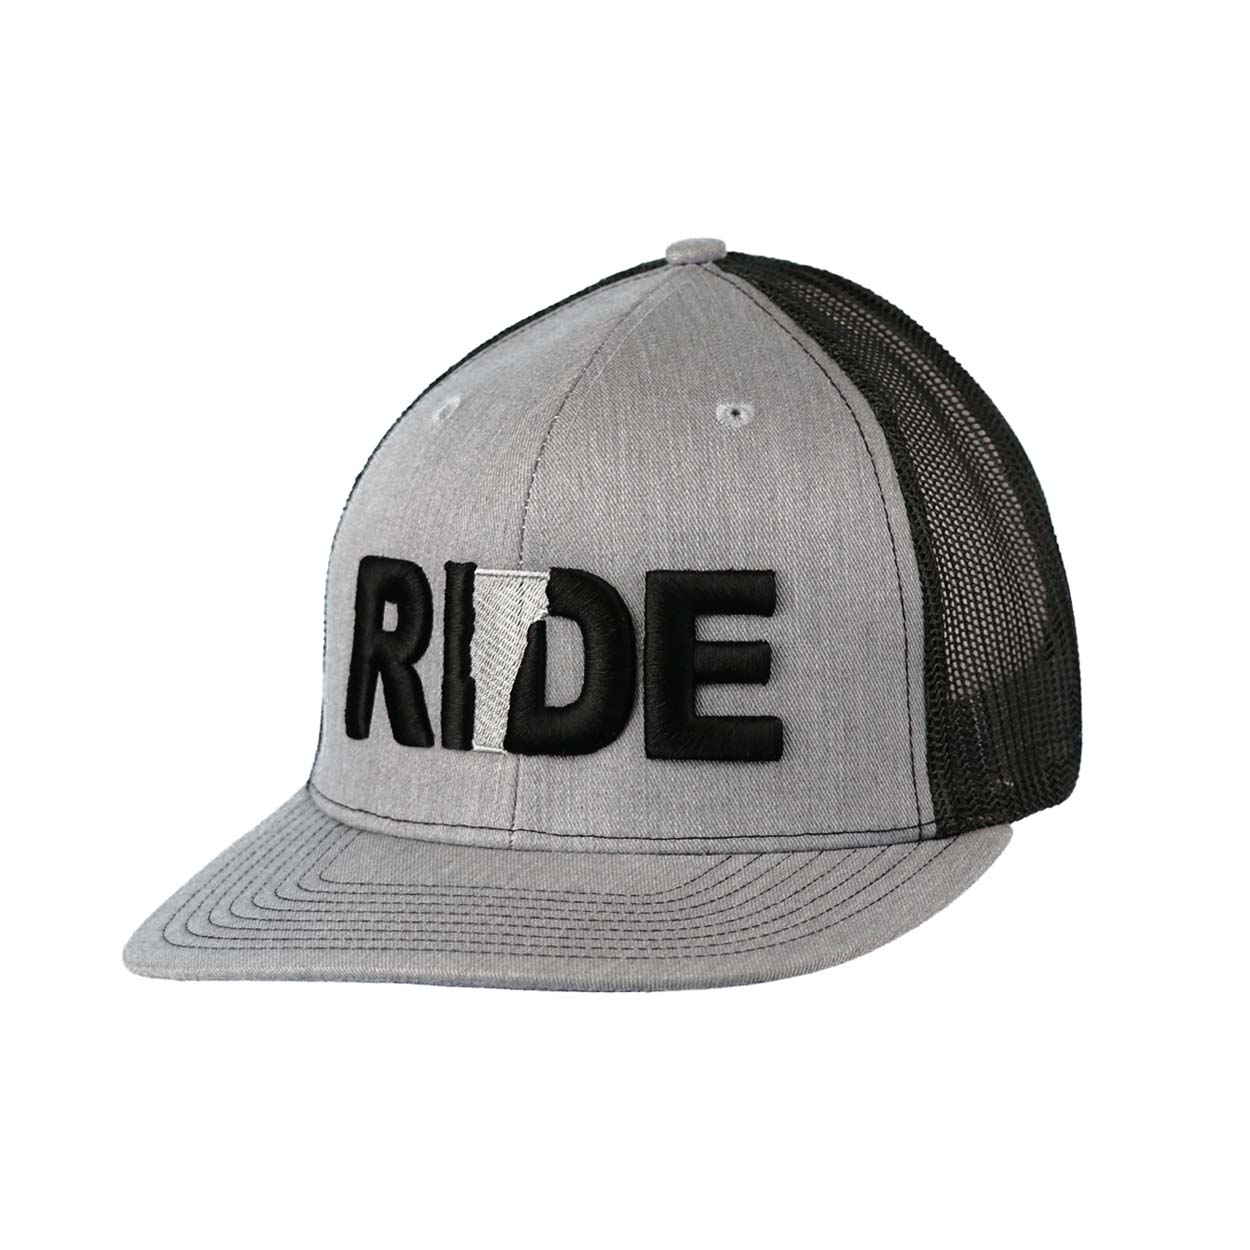 Ride Vermont Classic Pro 3D Puff Embroidered Snapback Trucker Hat Heather Gray/Black